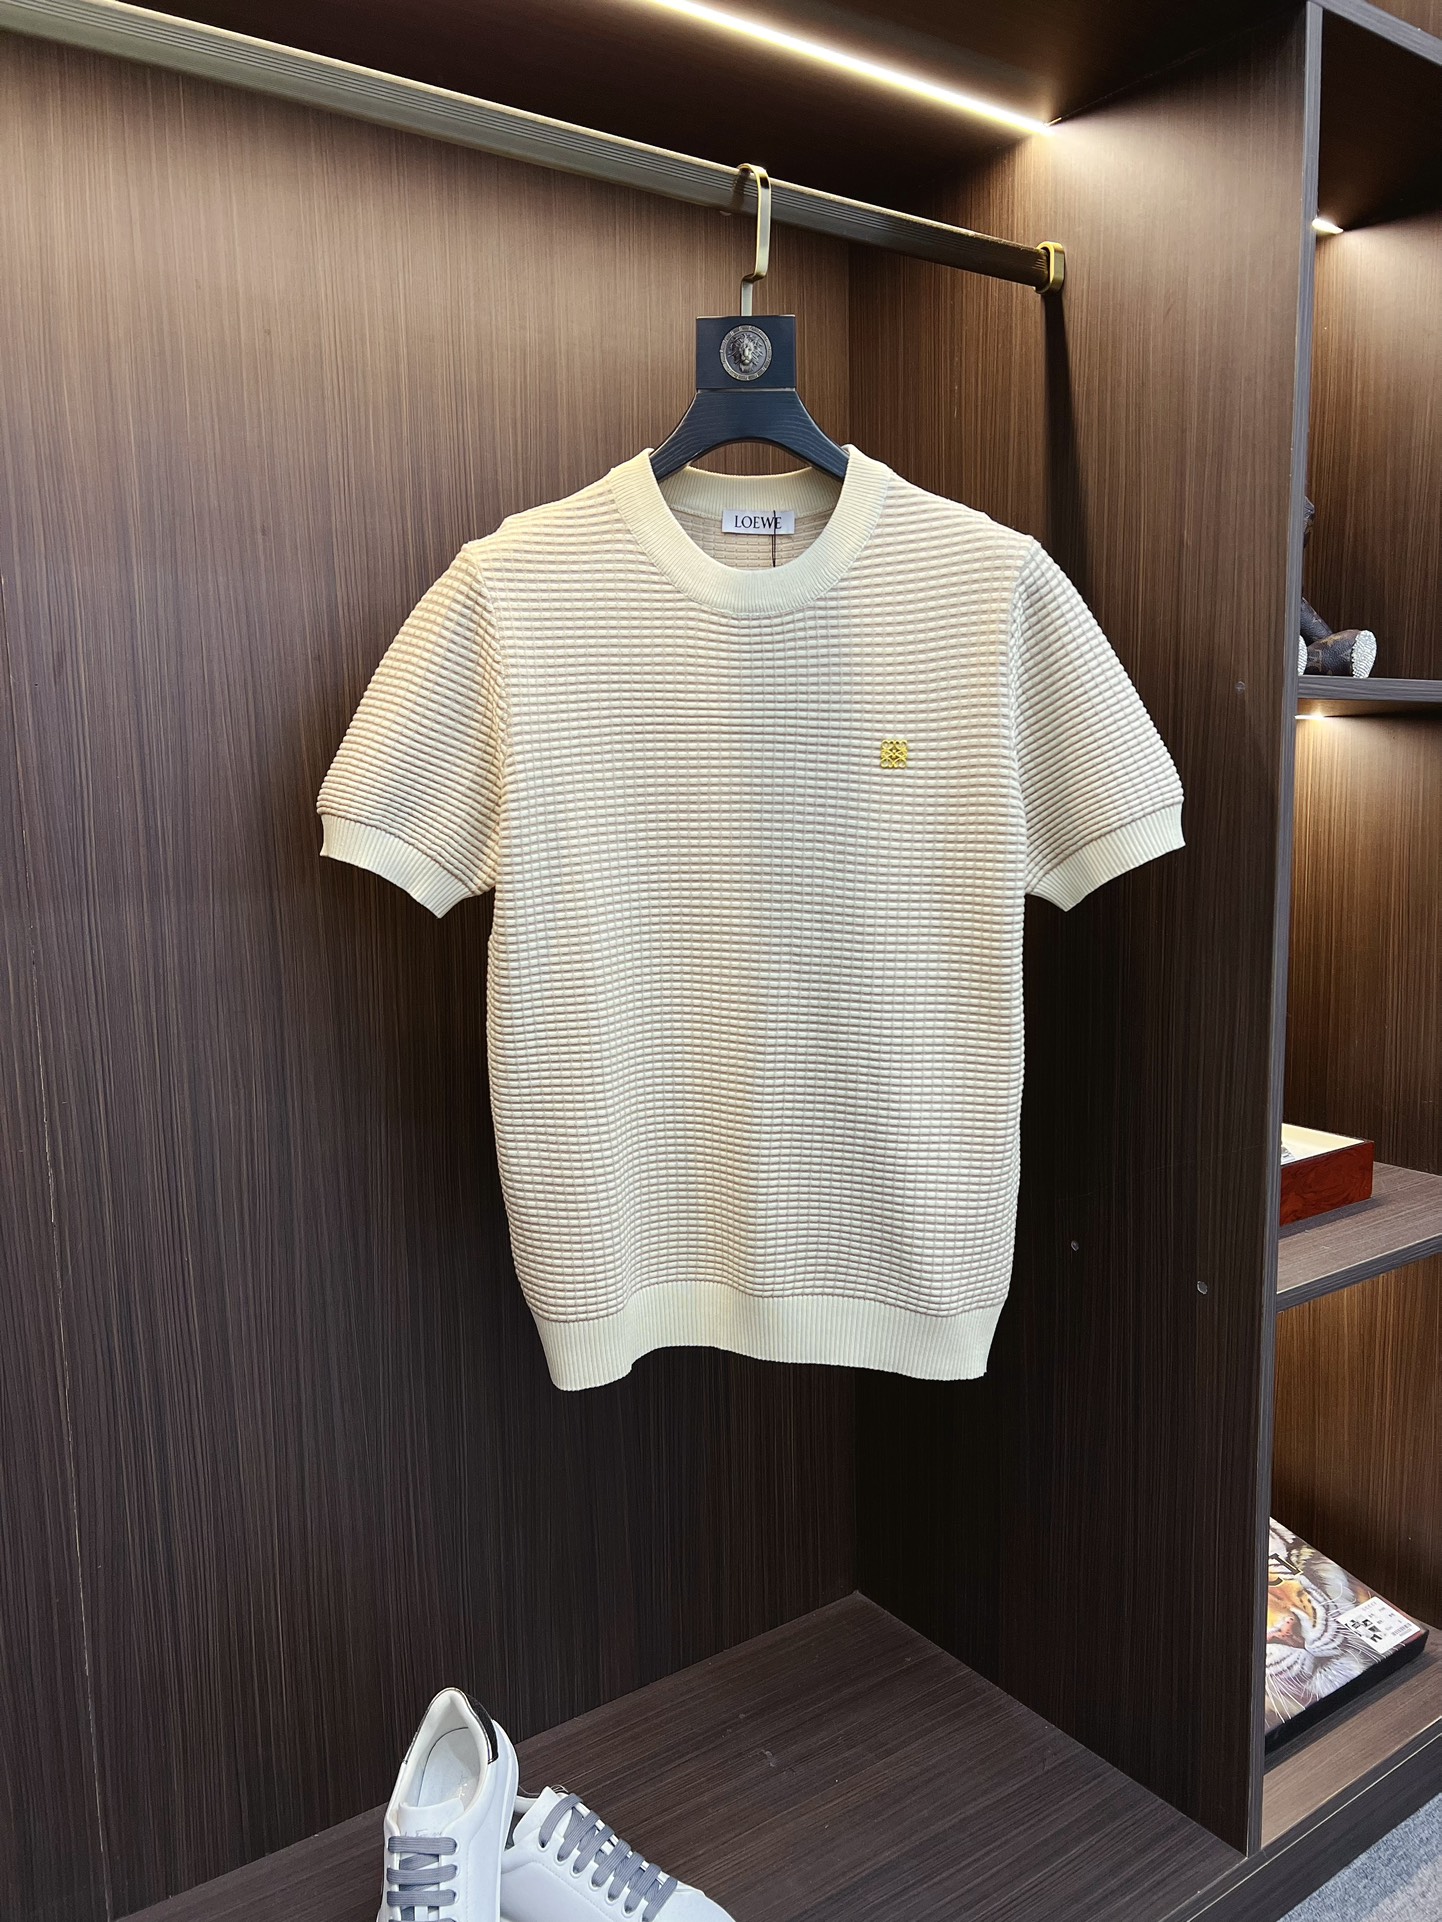 Loewe Clothing Knit Sweater T-Shirt Cotton Knitting Mercerized Spring/Summer Collection Short Sleeve